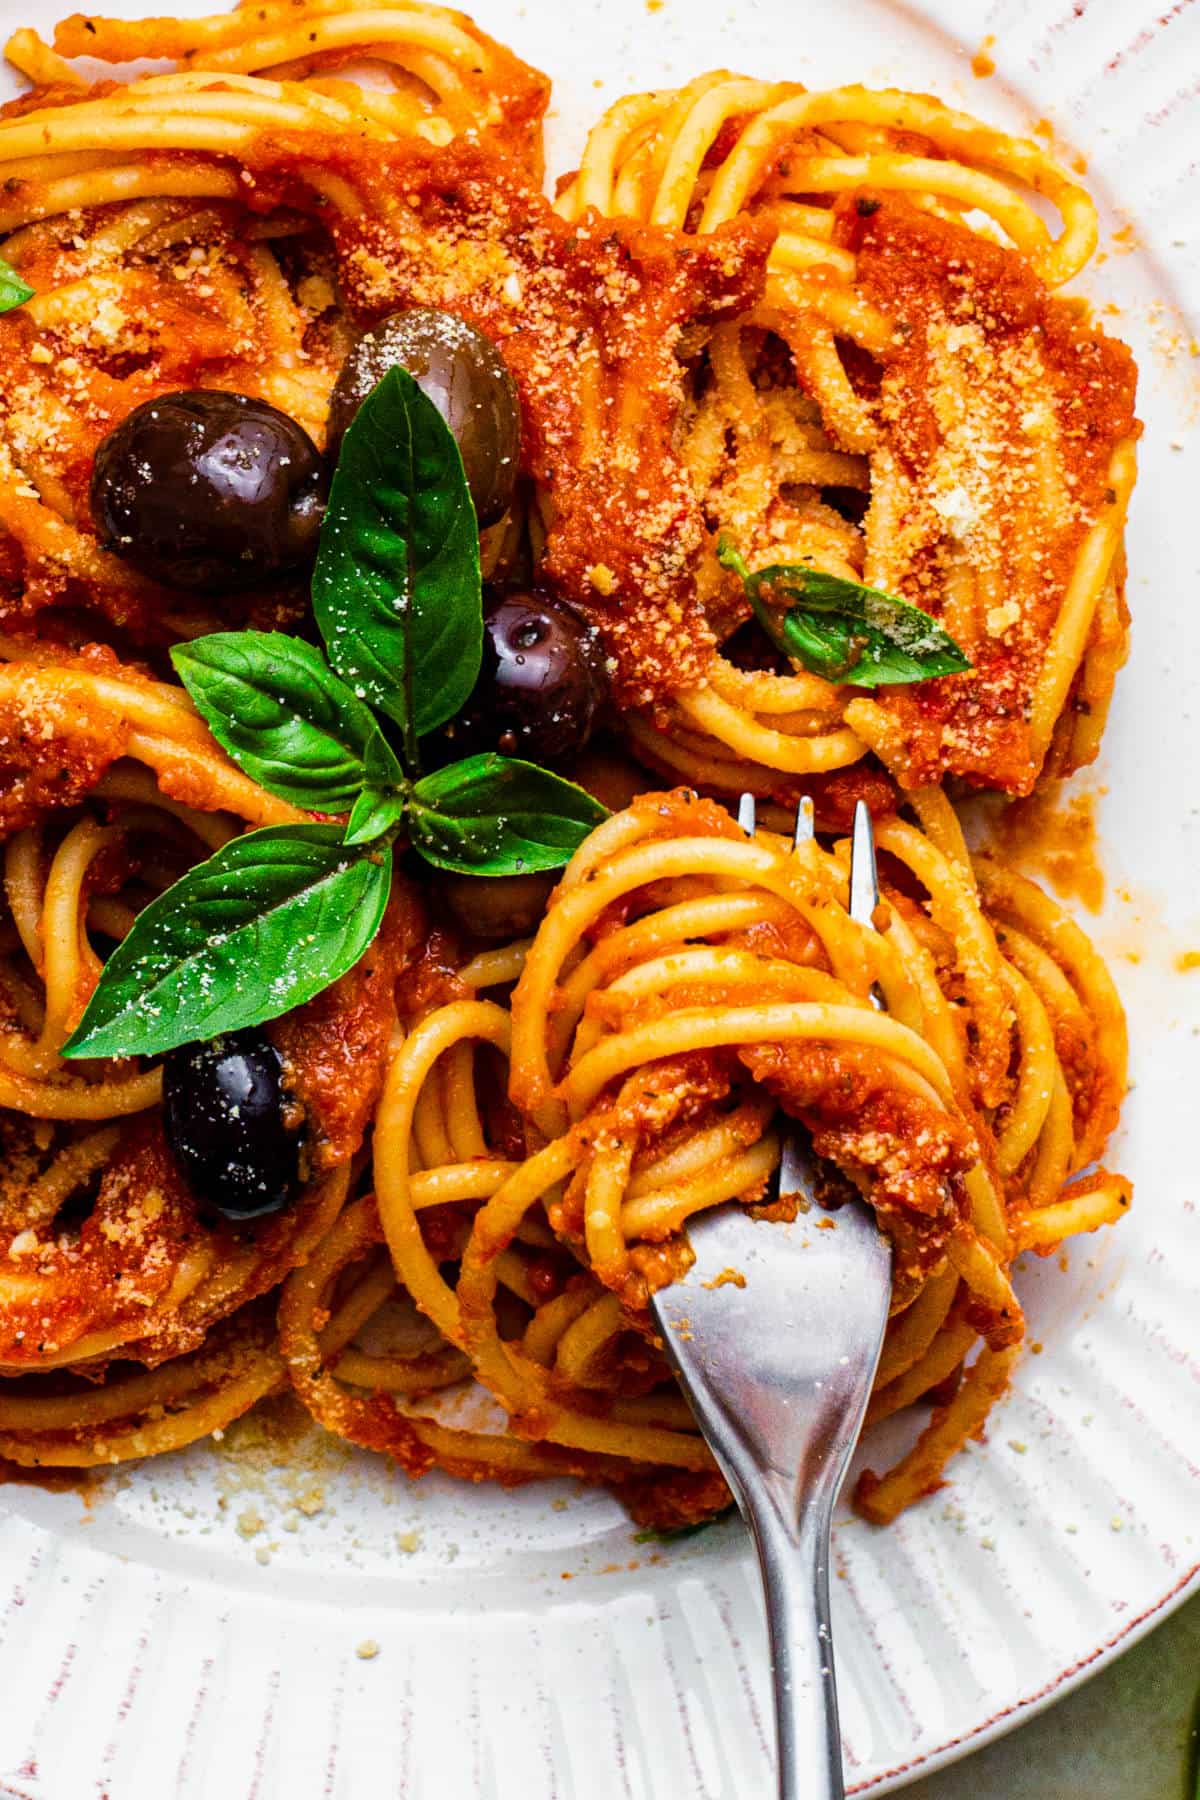 The hidden veggie pasta sauce served over spaghetti, with fresh basil leaves and olives.